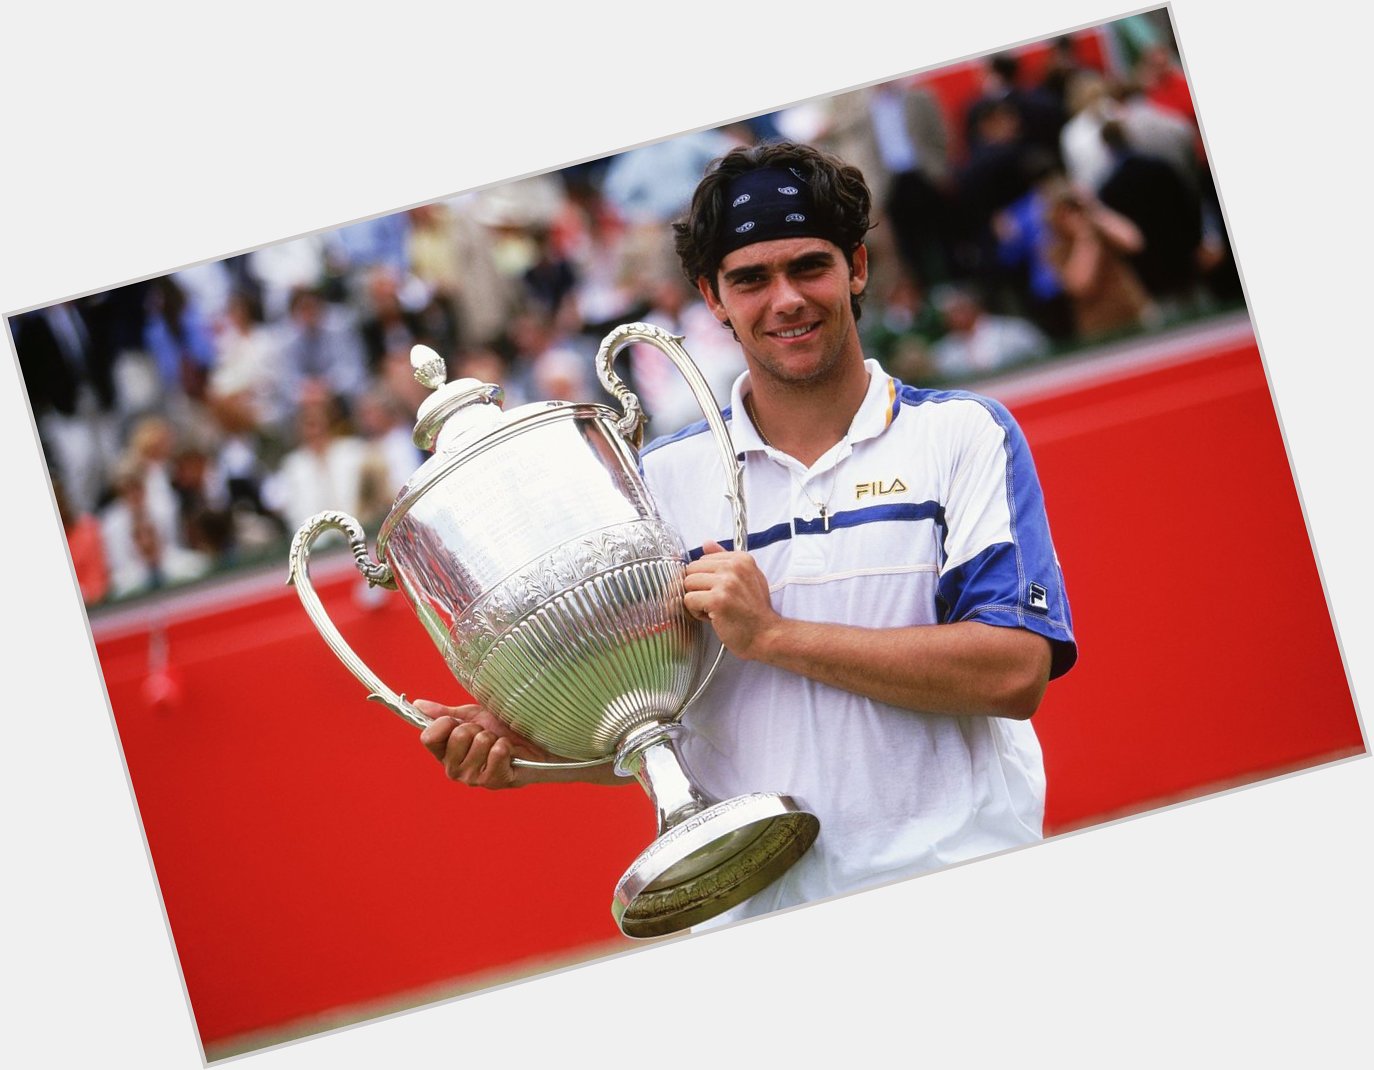 Happy birthday, Mark Philippoussis! 

In 1997 the Australian won the singles AND doubles titles at 